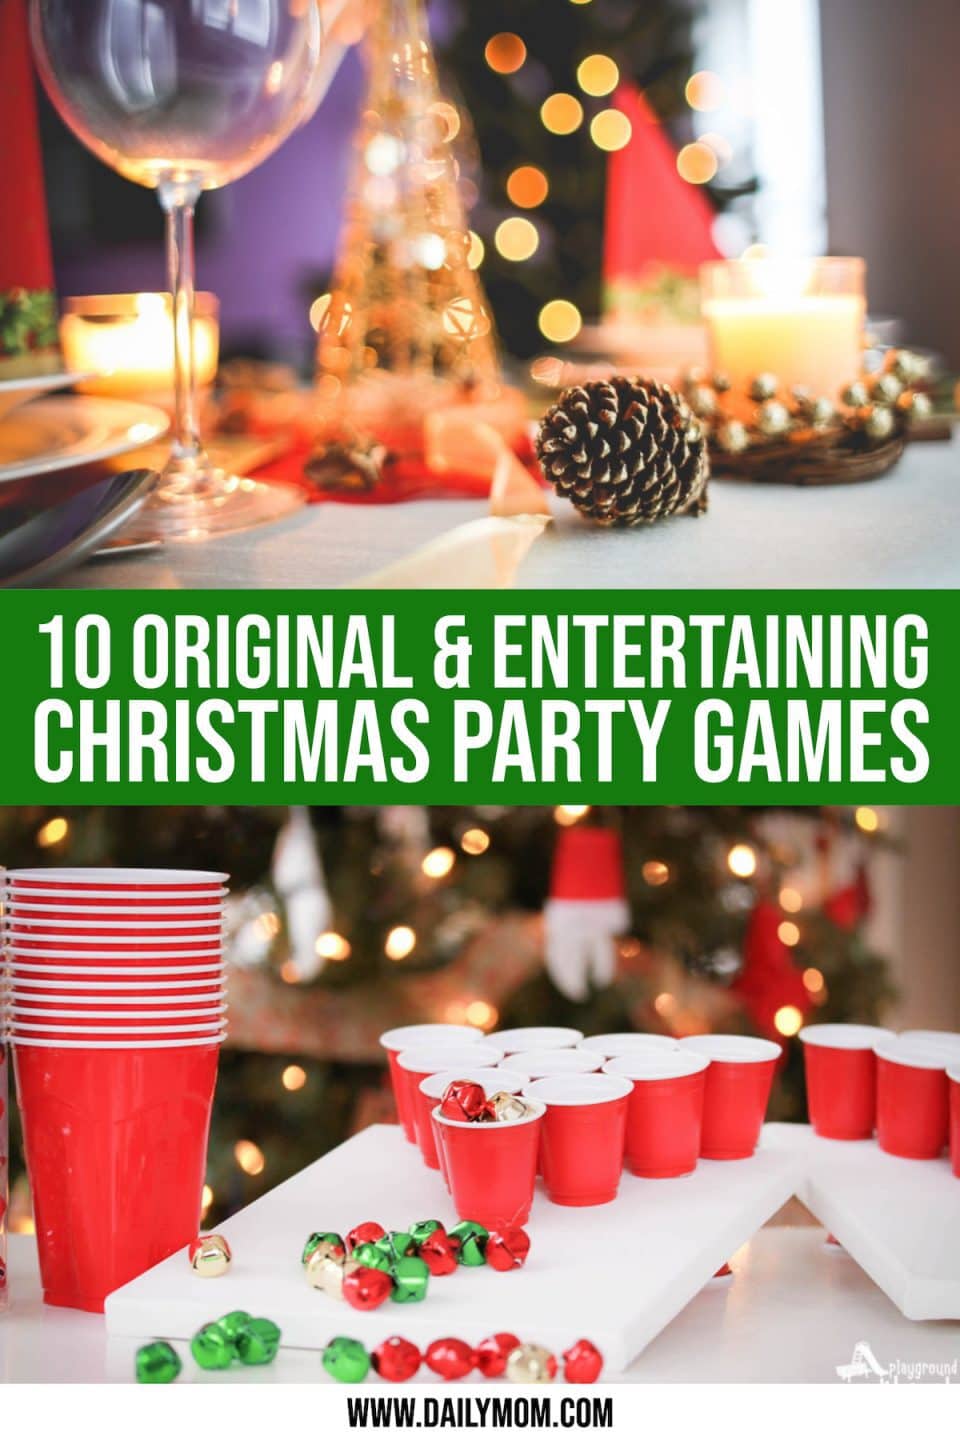 10 Original And Entertaining Christmas Party Games To Entertain Your ...